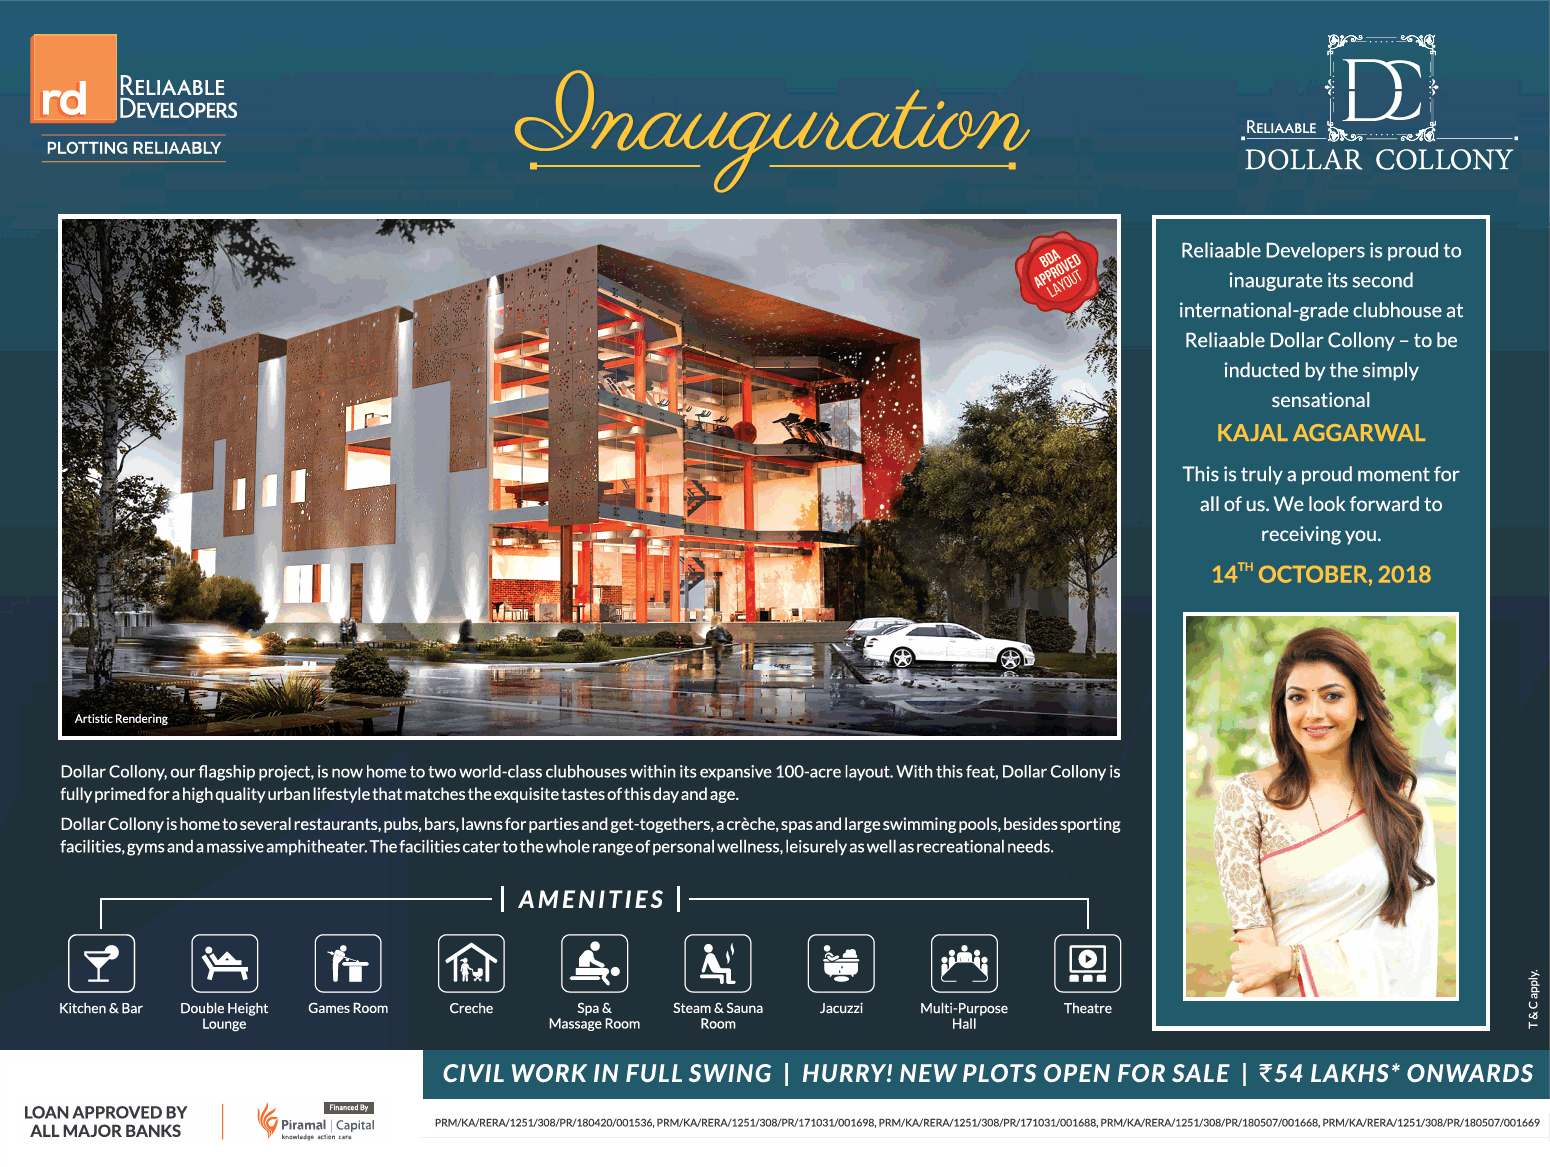 Presenting 2nd international grade clubhouse at Reliaable Dollars Collony in Bangalore